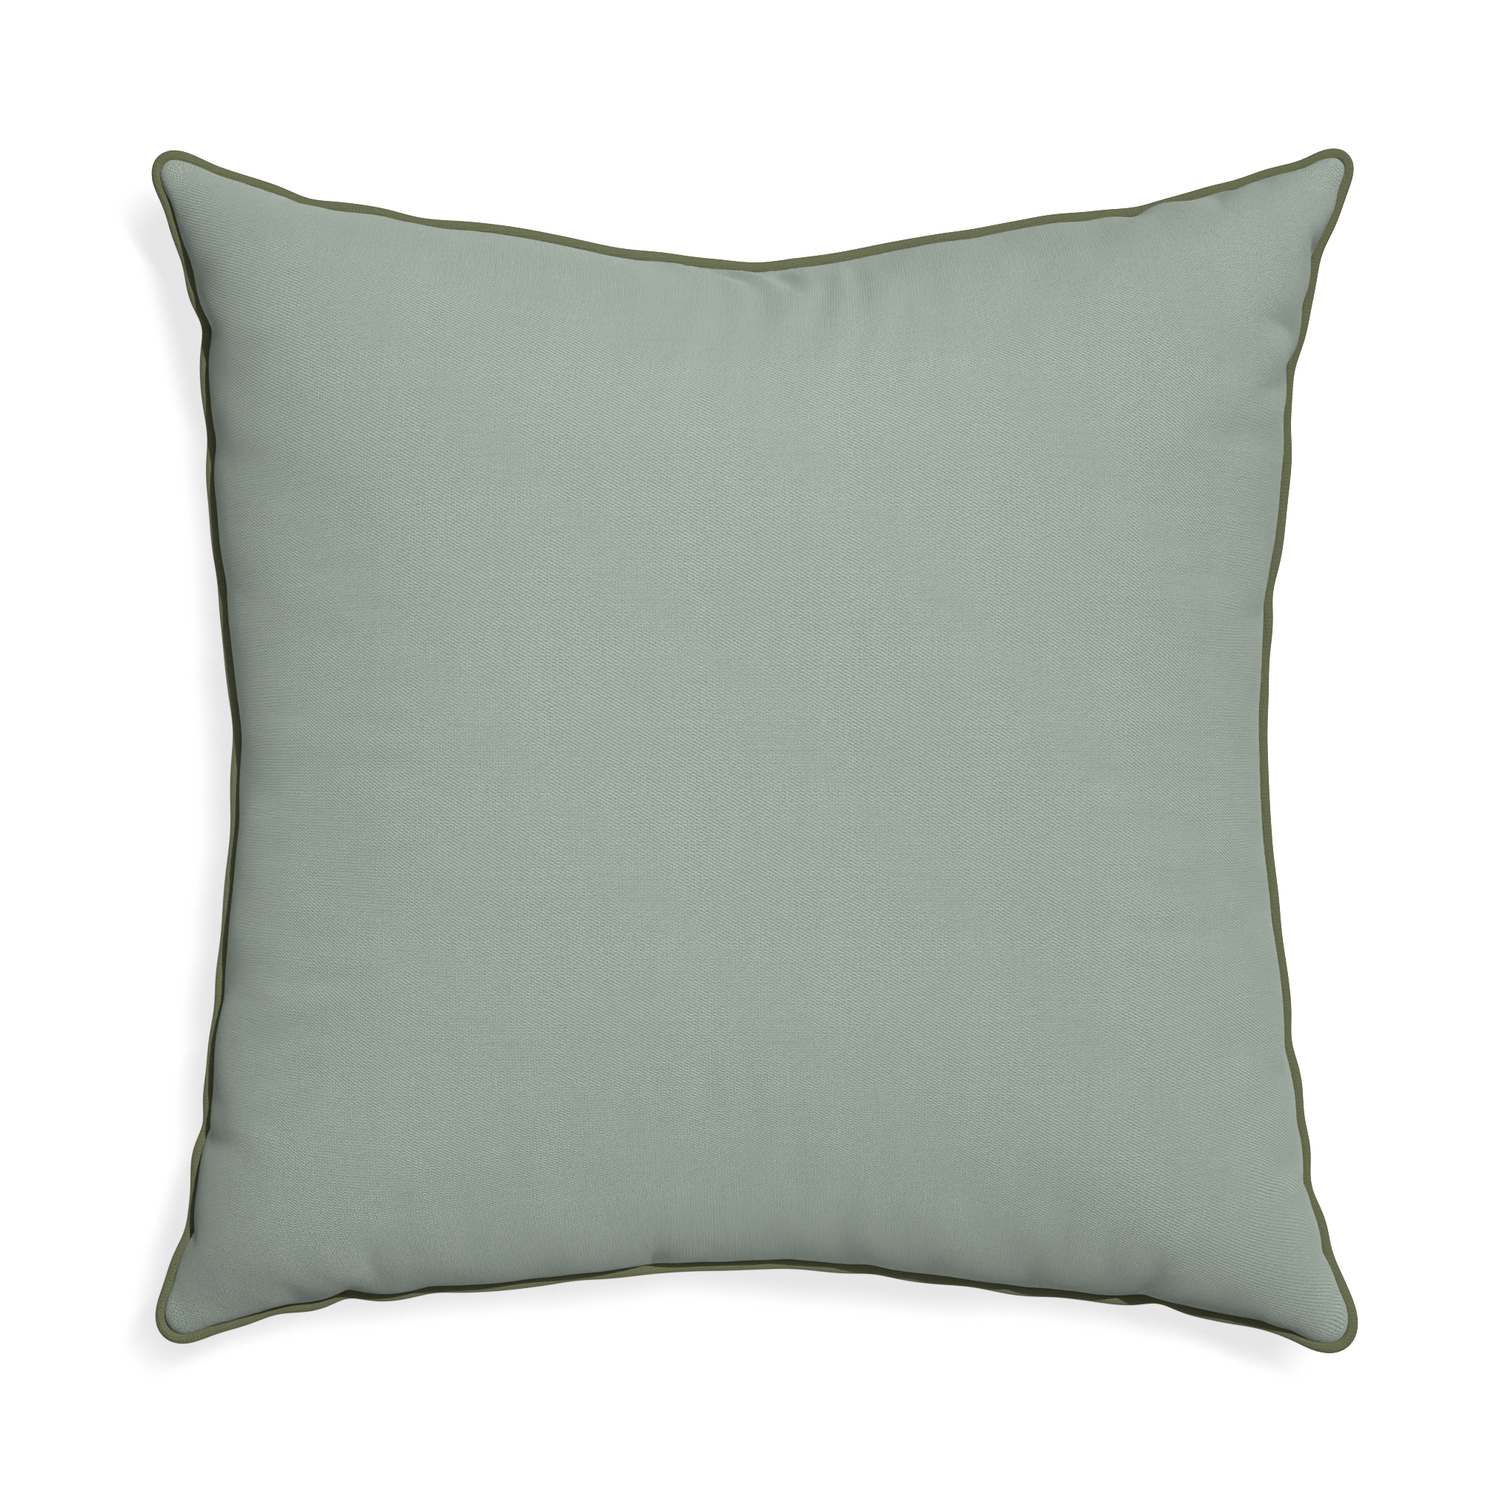 Euro-sham sage custom sage green cottonpillow with f piping on white background